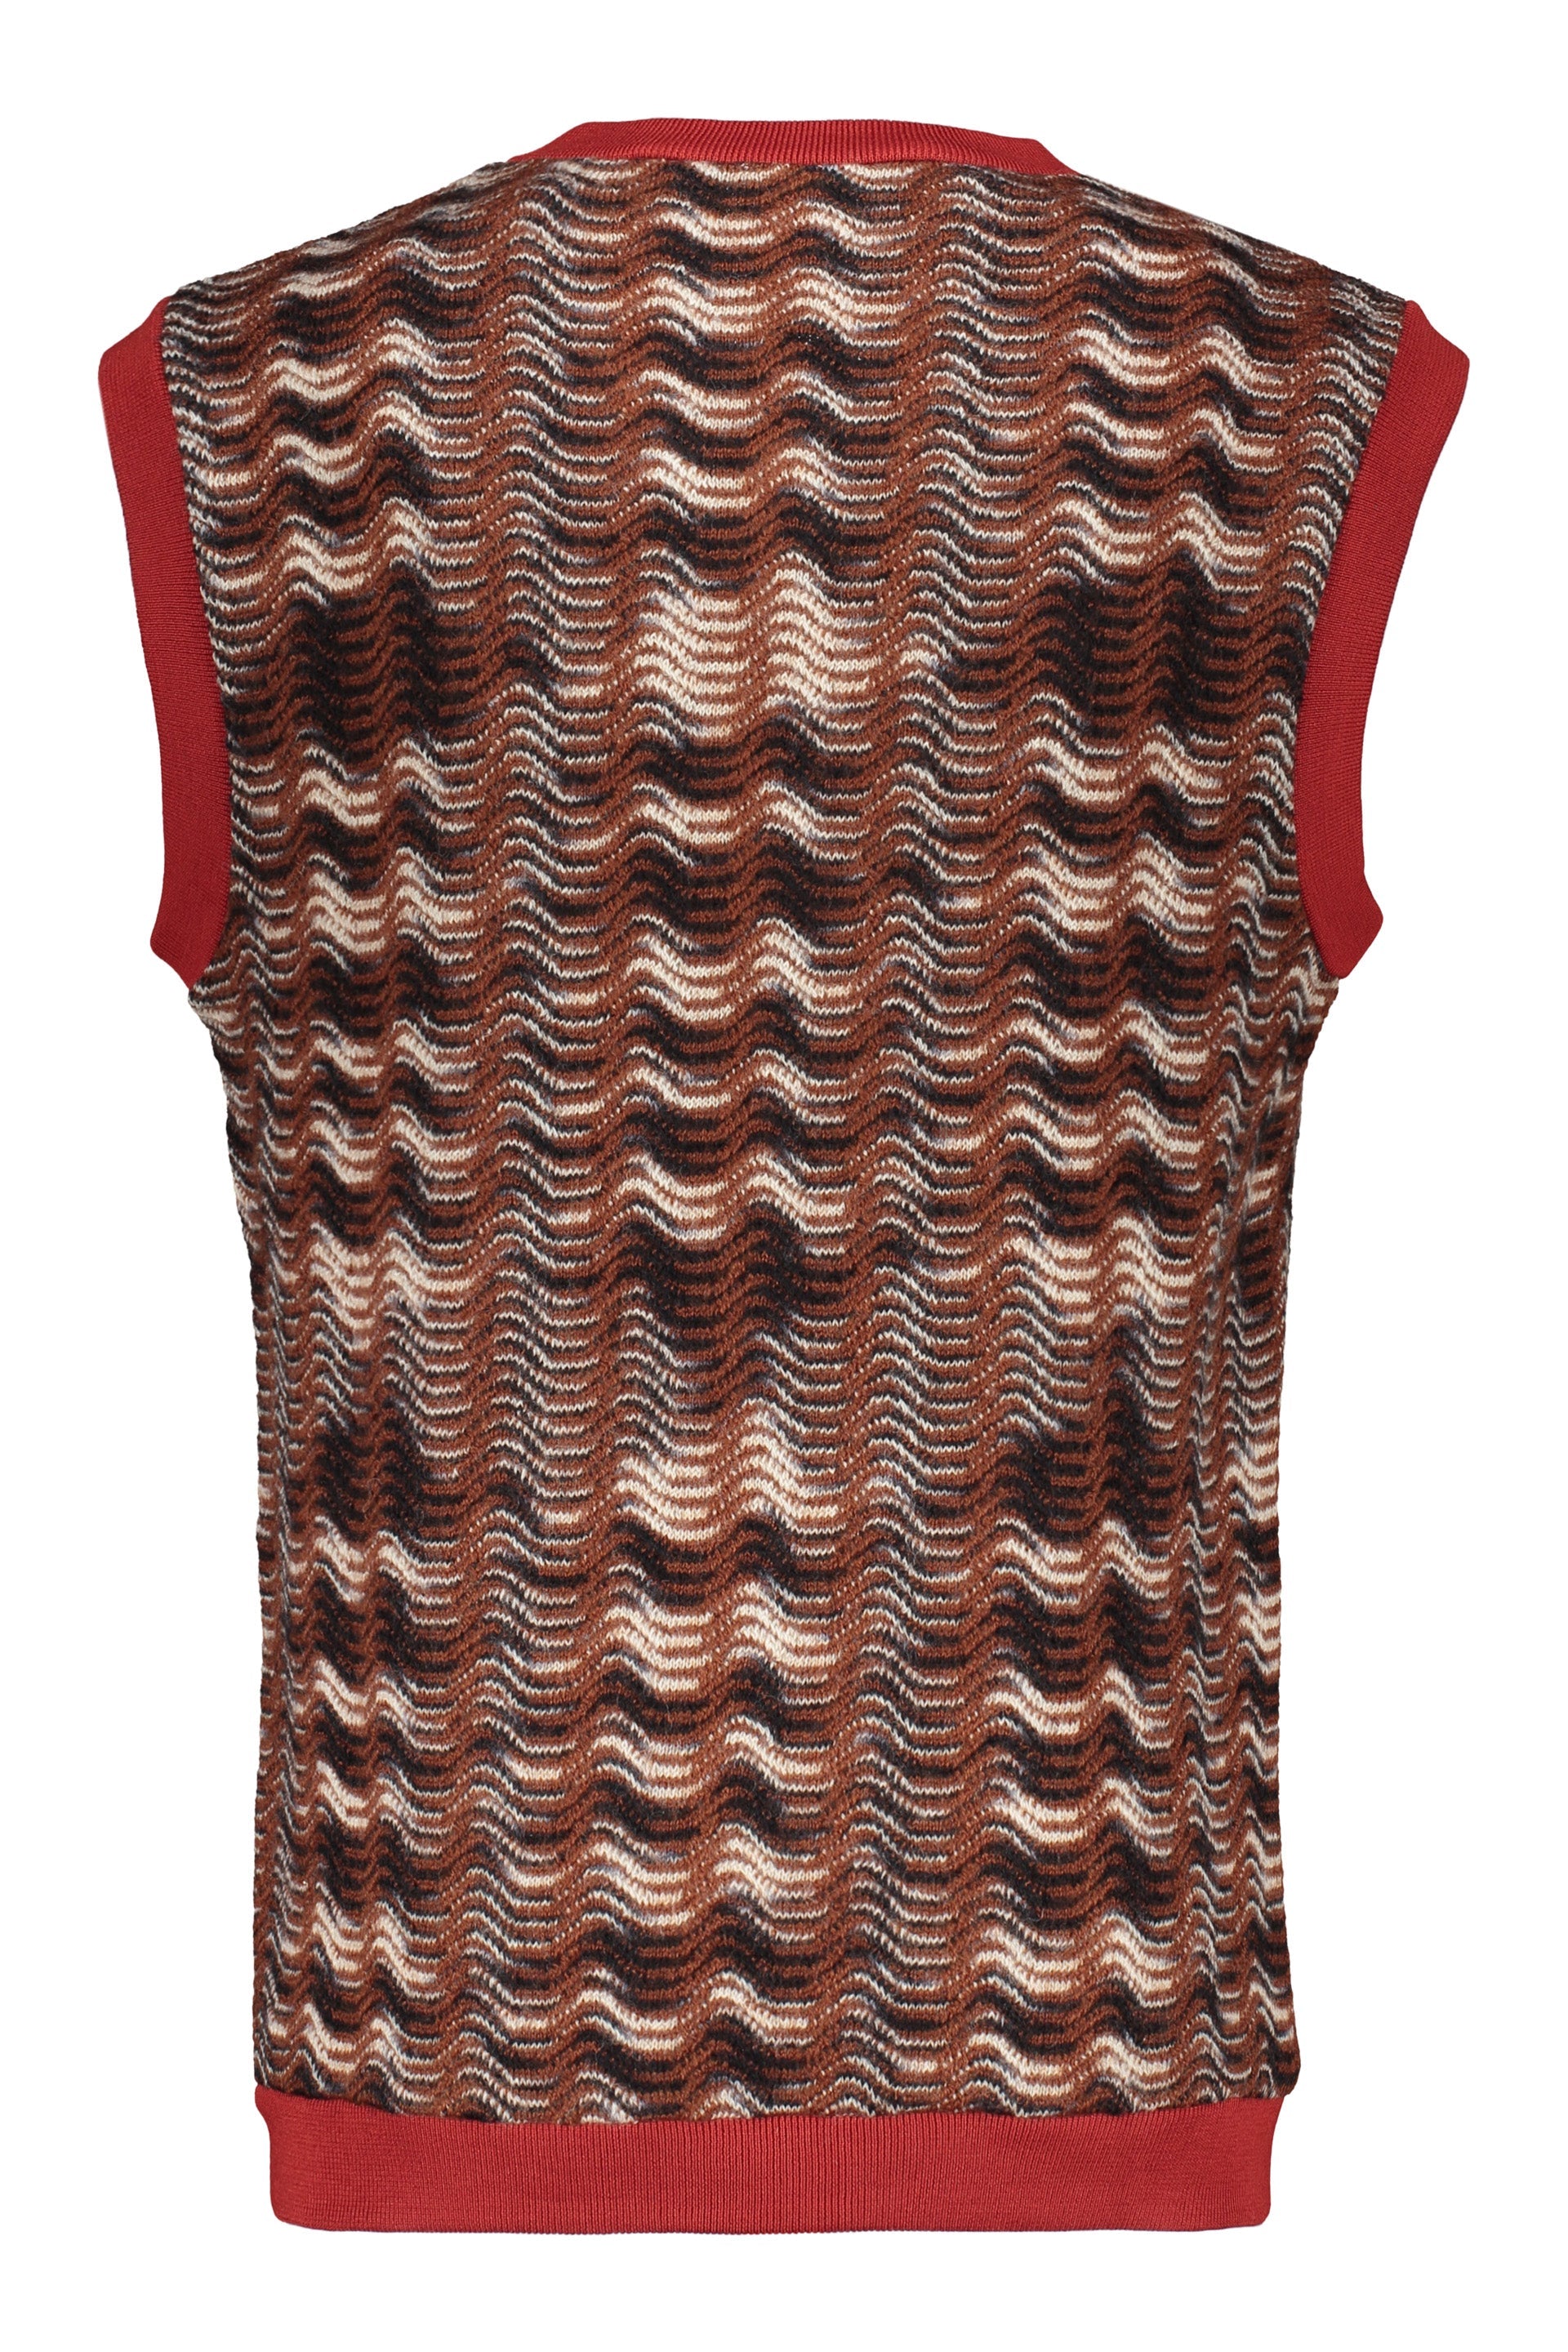 Missoni-OUTLET-SALE-Knitted-vest-Jacken-Mantel-ARCHIVE-COLLECTION-2_1edd7822-c959-456c-a8f9-815f6c15f315.jpg